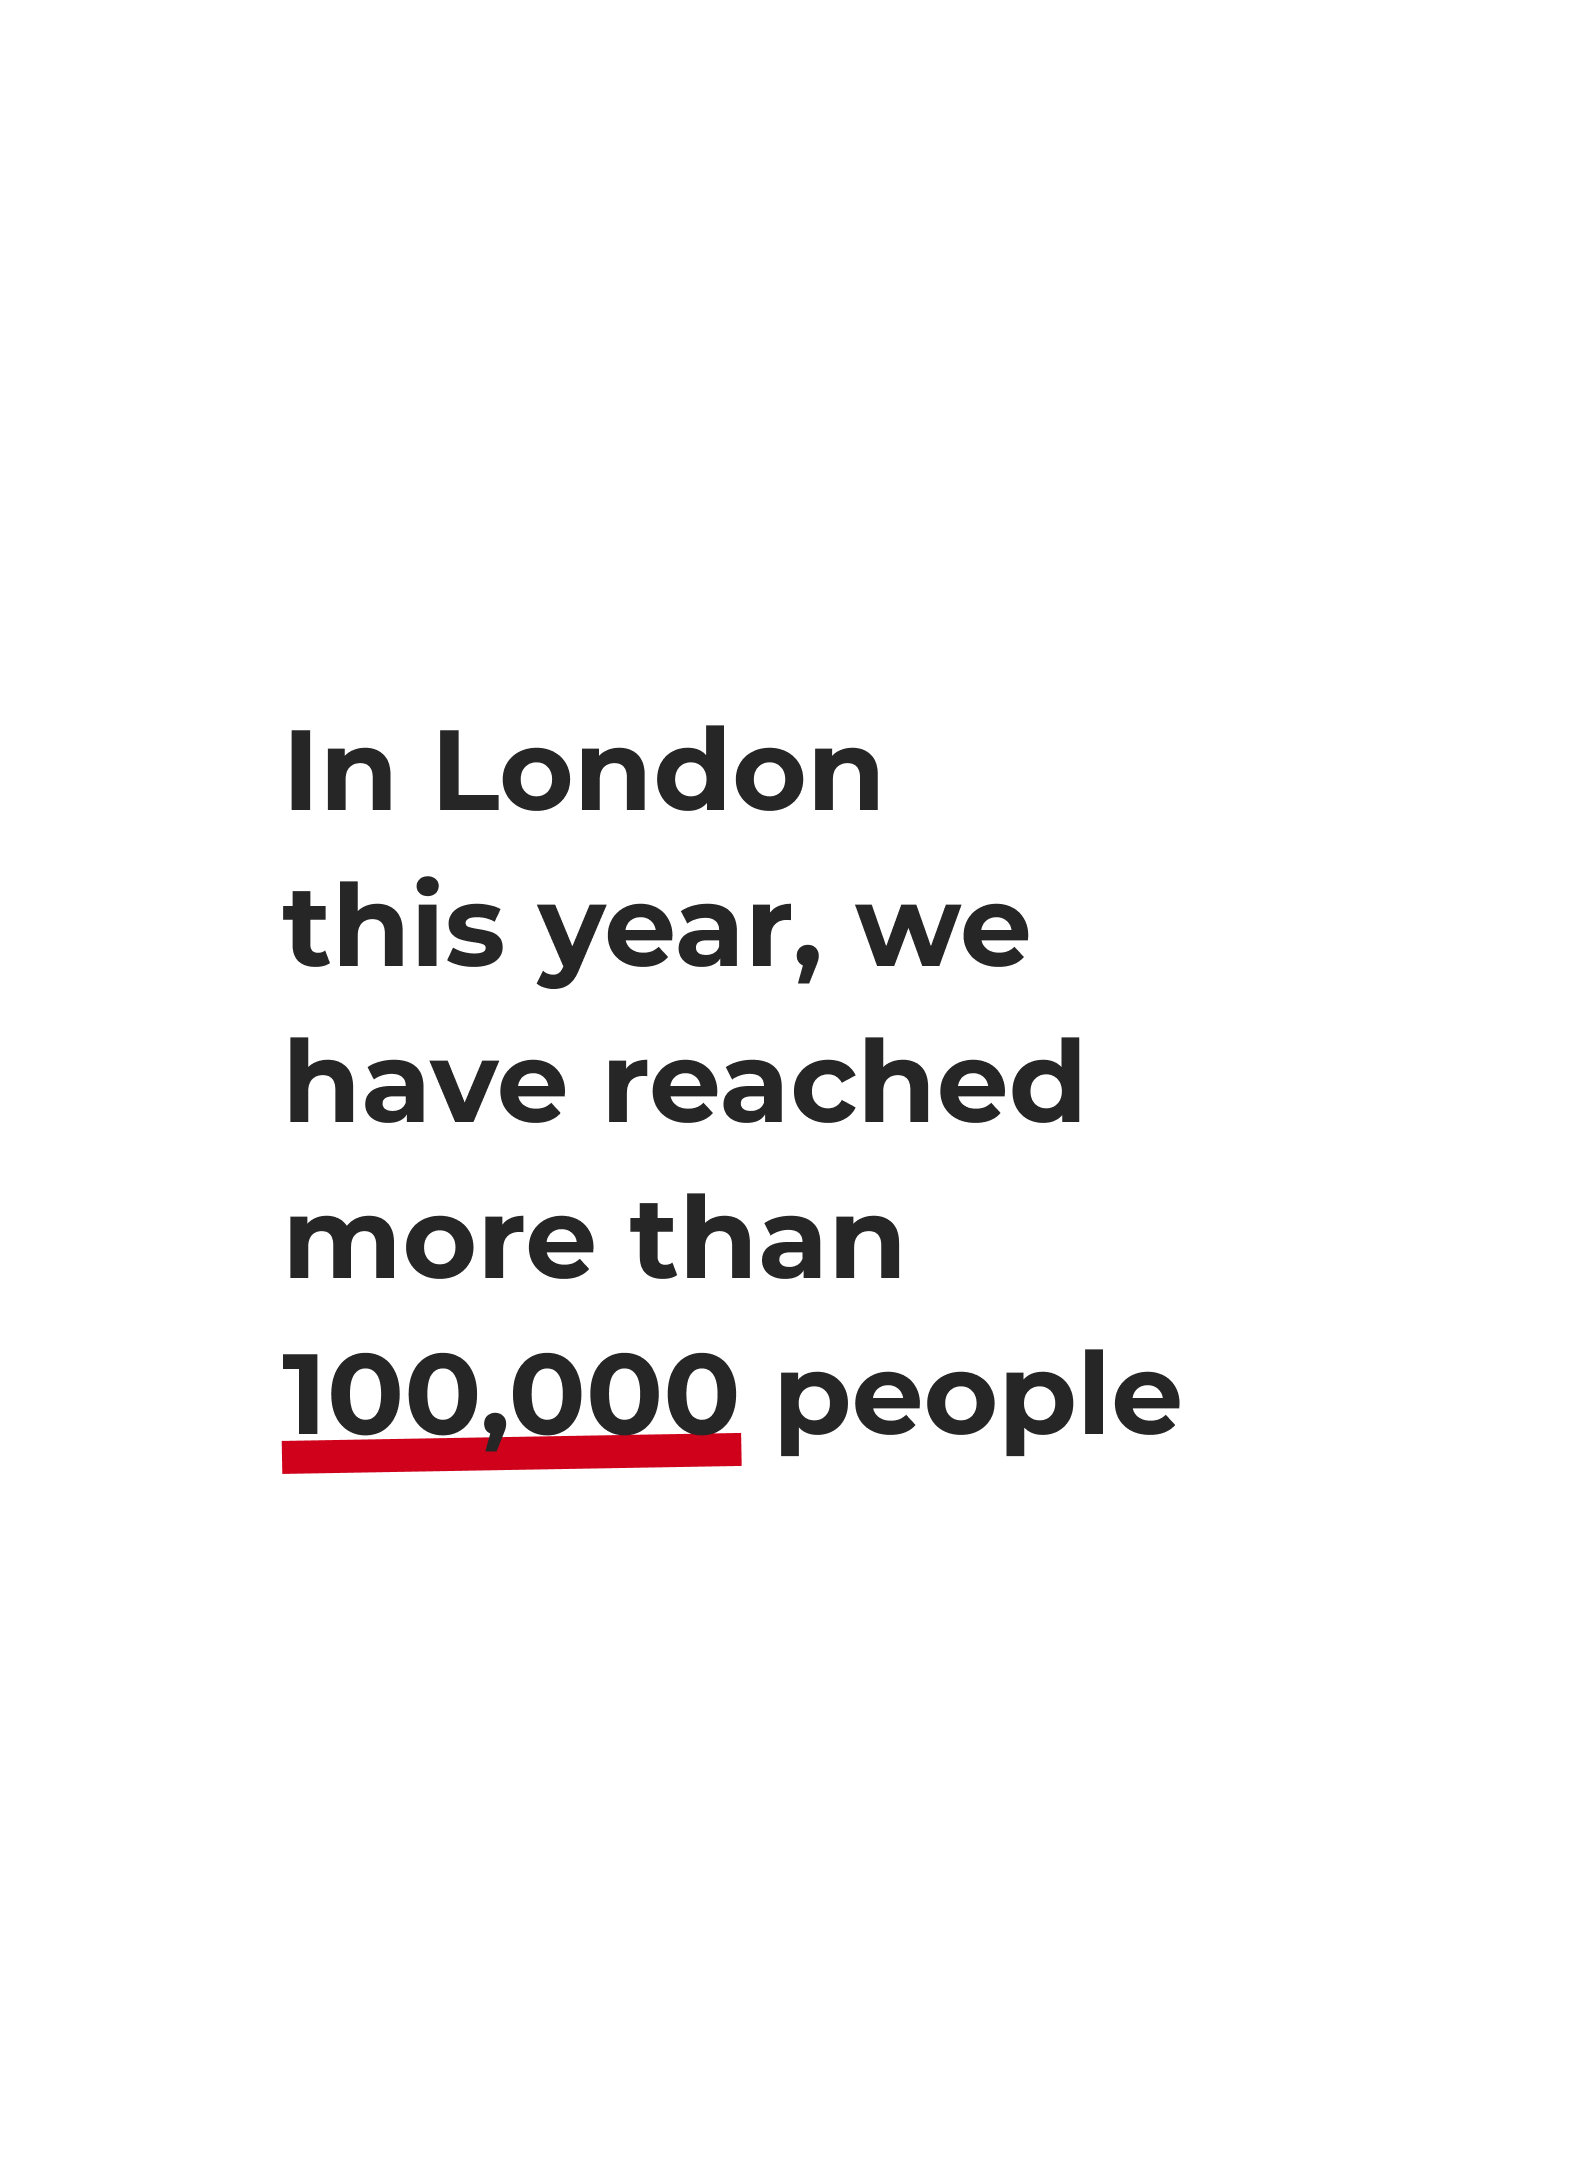 Graphic saying 'In London this year, we have reached more than 100,000 people'